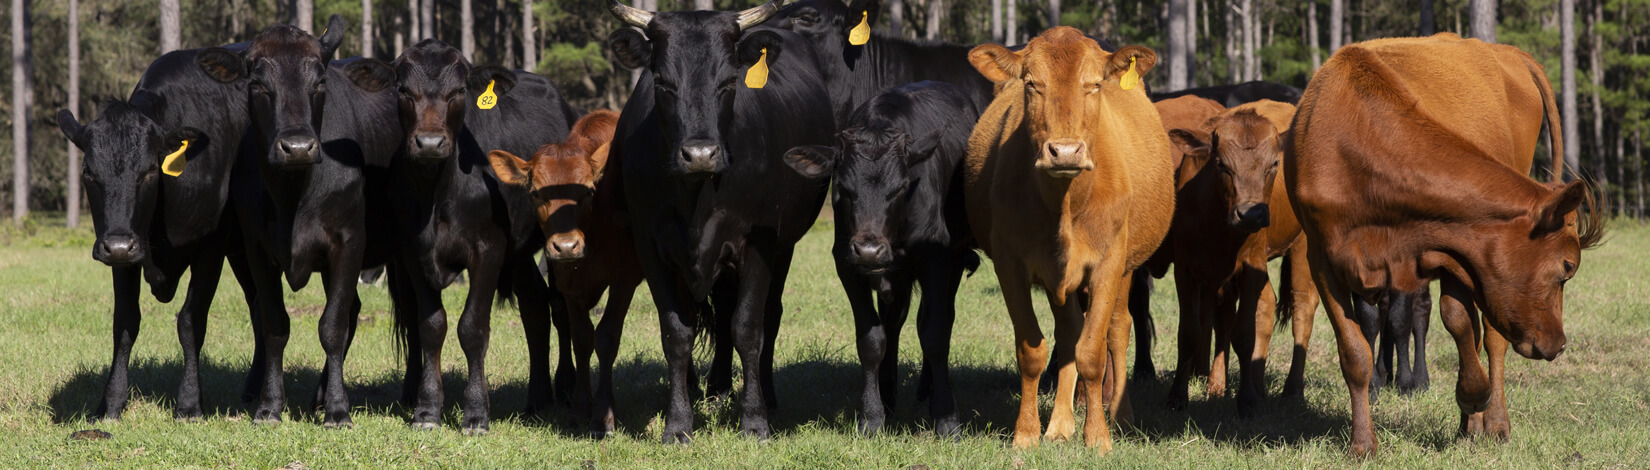 2017 Beef Dairy Cattle and Allied Industries in FL - Food and Resource  Economics Department - University of Florida, Institute of Food and  Agricultural Sciences - UF/IFAS